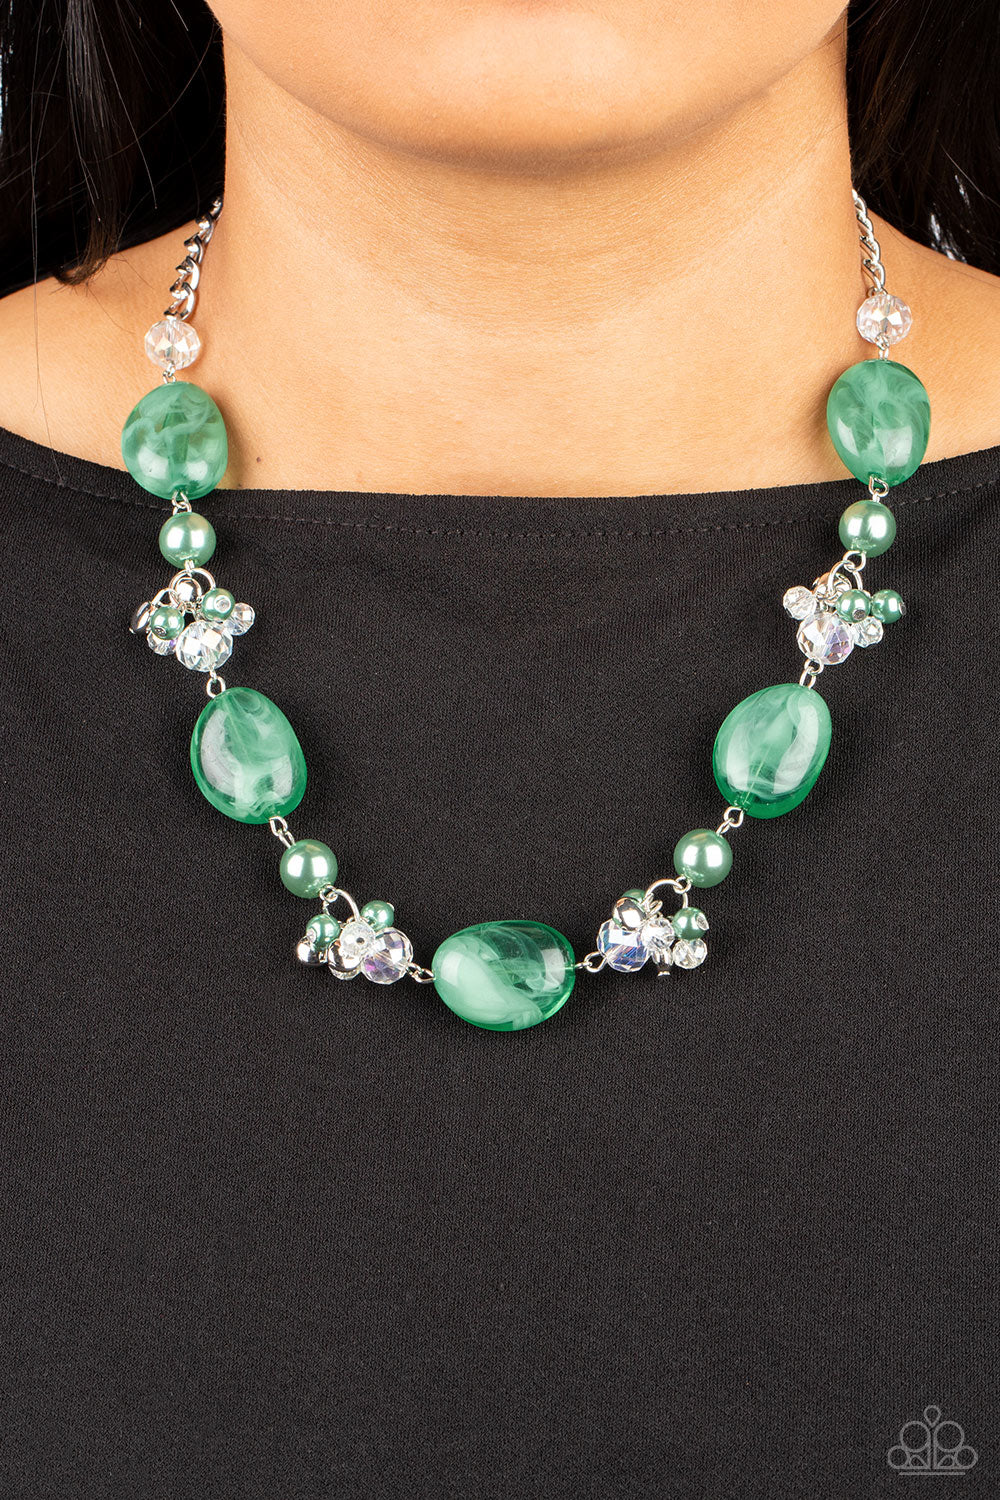 The Top TENACIOUS- Green and Silver Necklace- Paparazzi Accessories